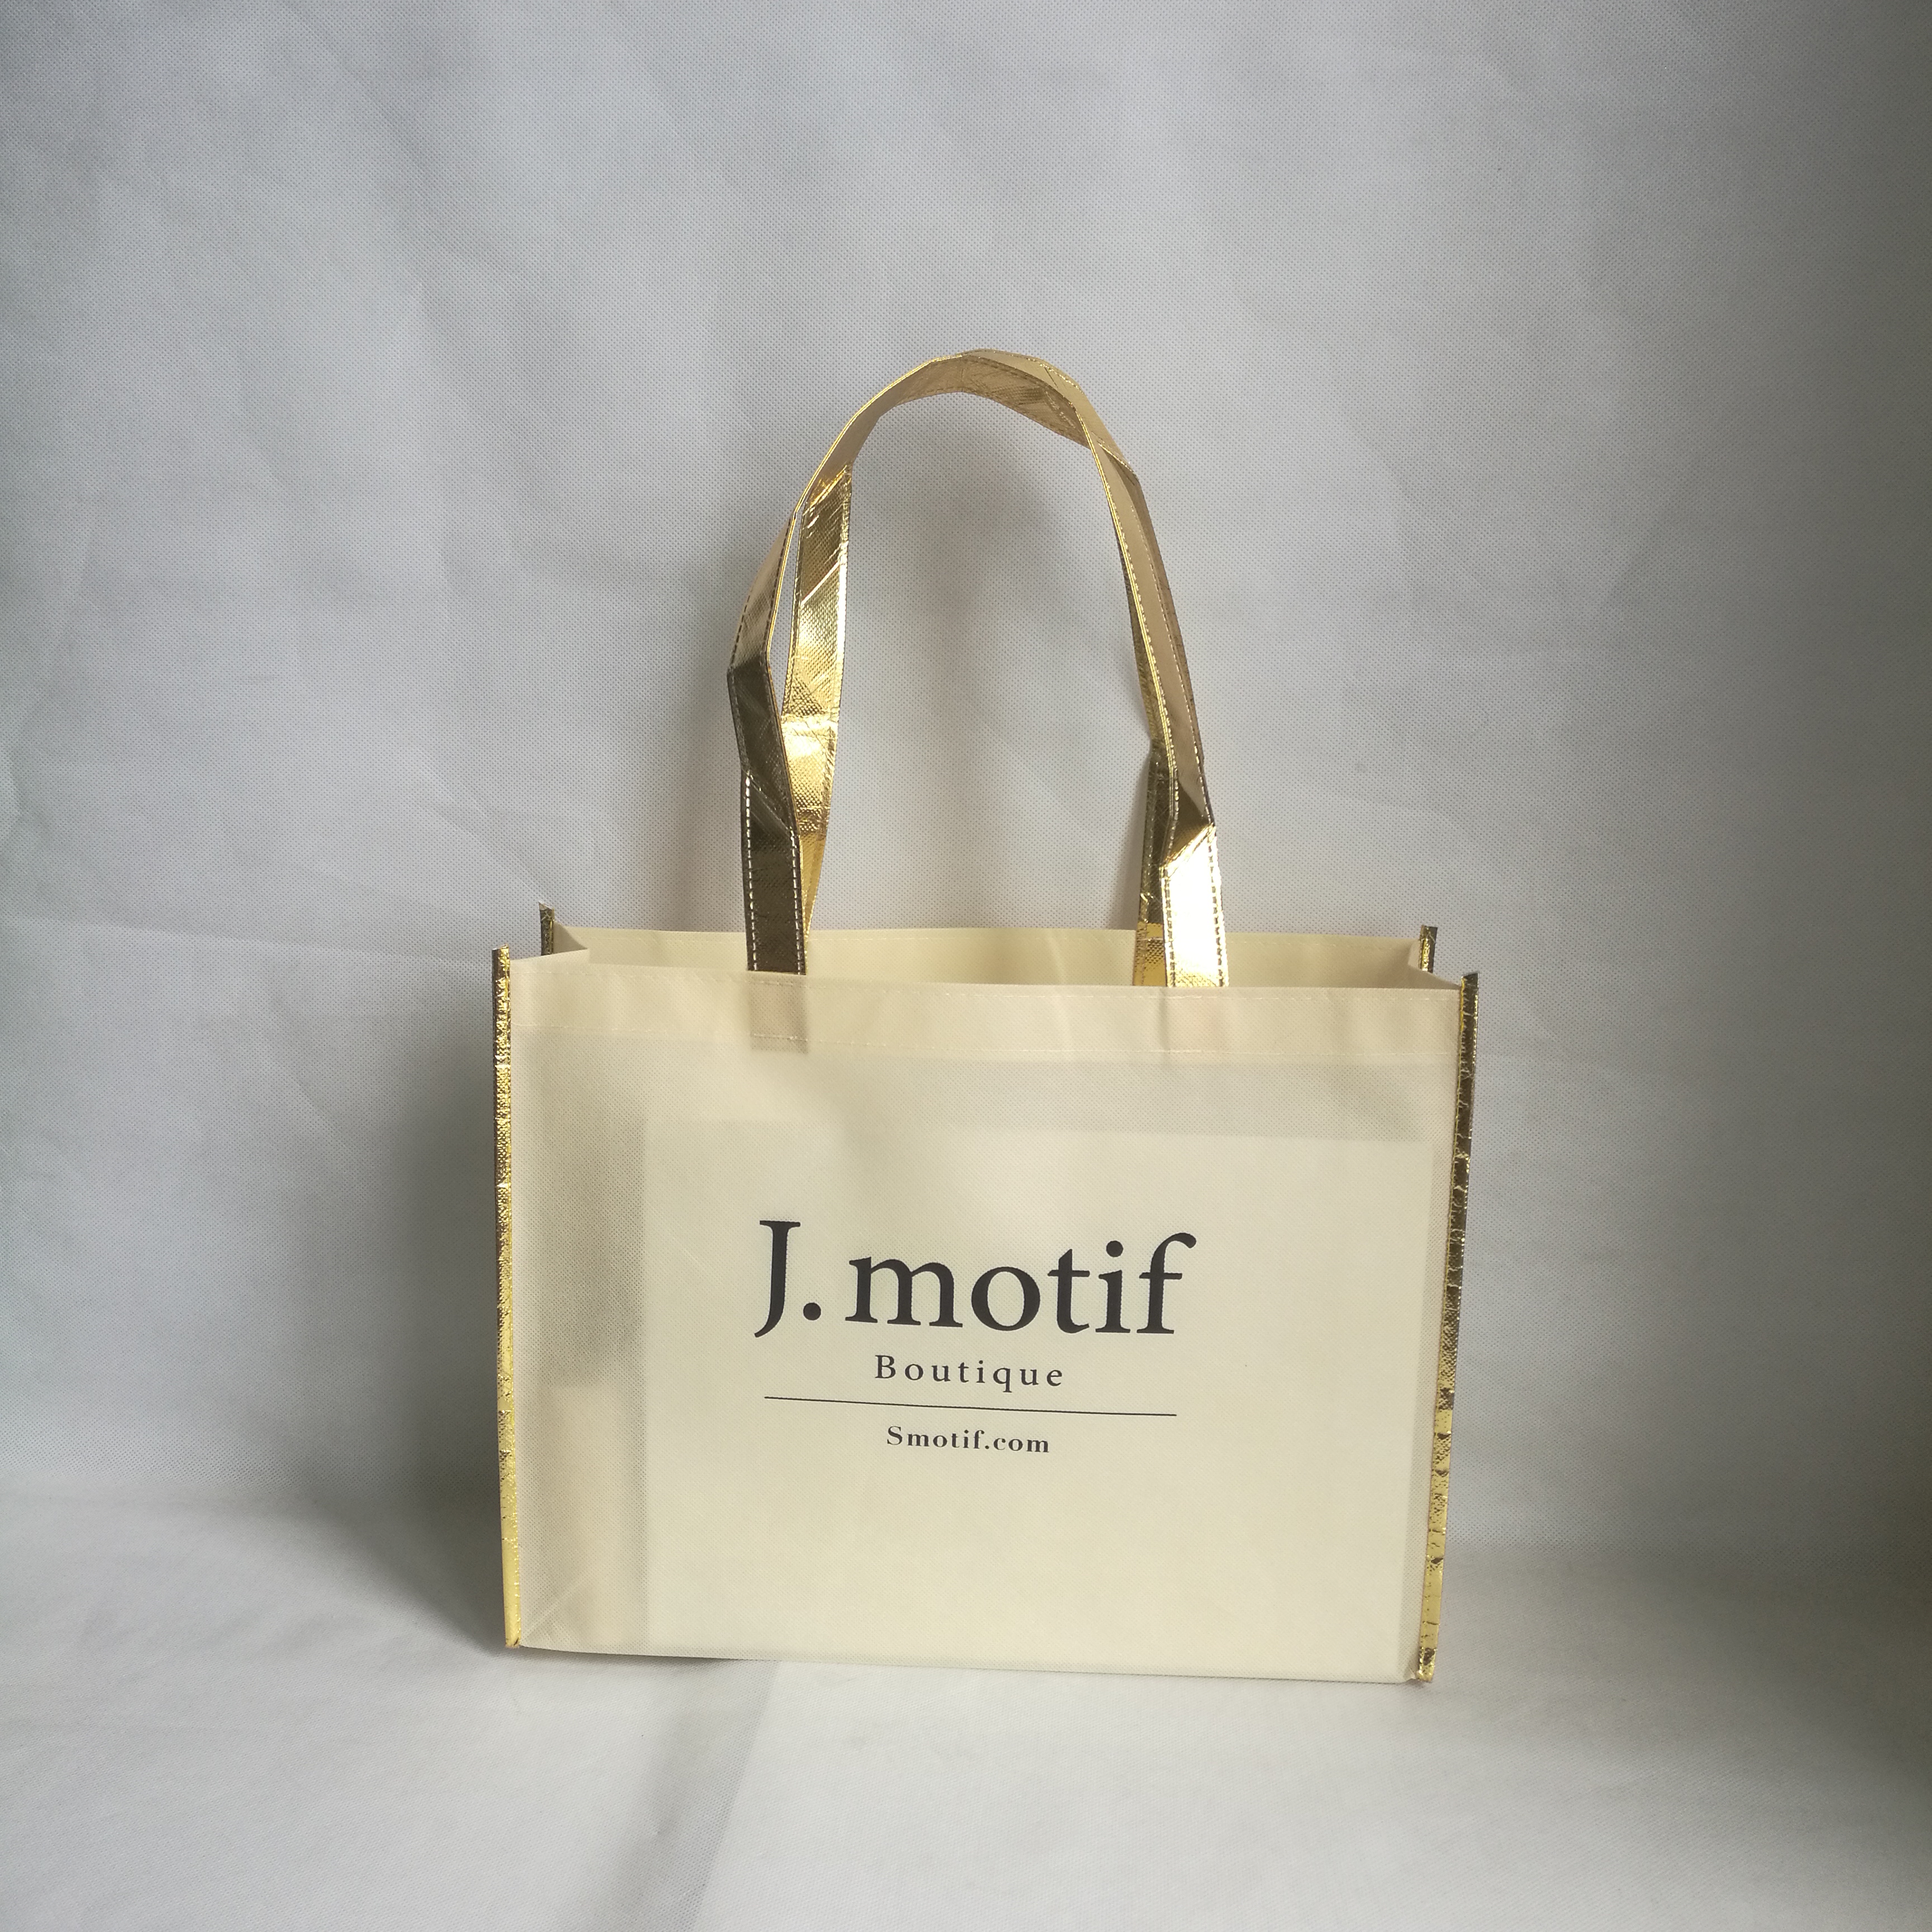 1000pcs/lot Beige Non Woven Fabric Shopping Bags with Gold Trim Folding Reusable Non Woven Promotional Bags for Trade Show/Gifts